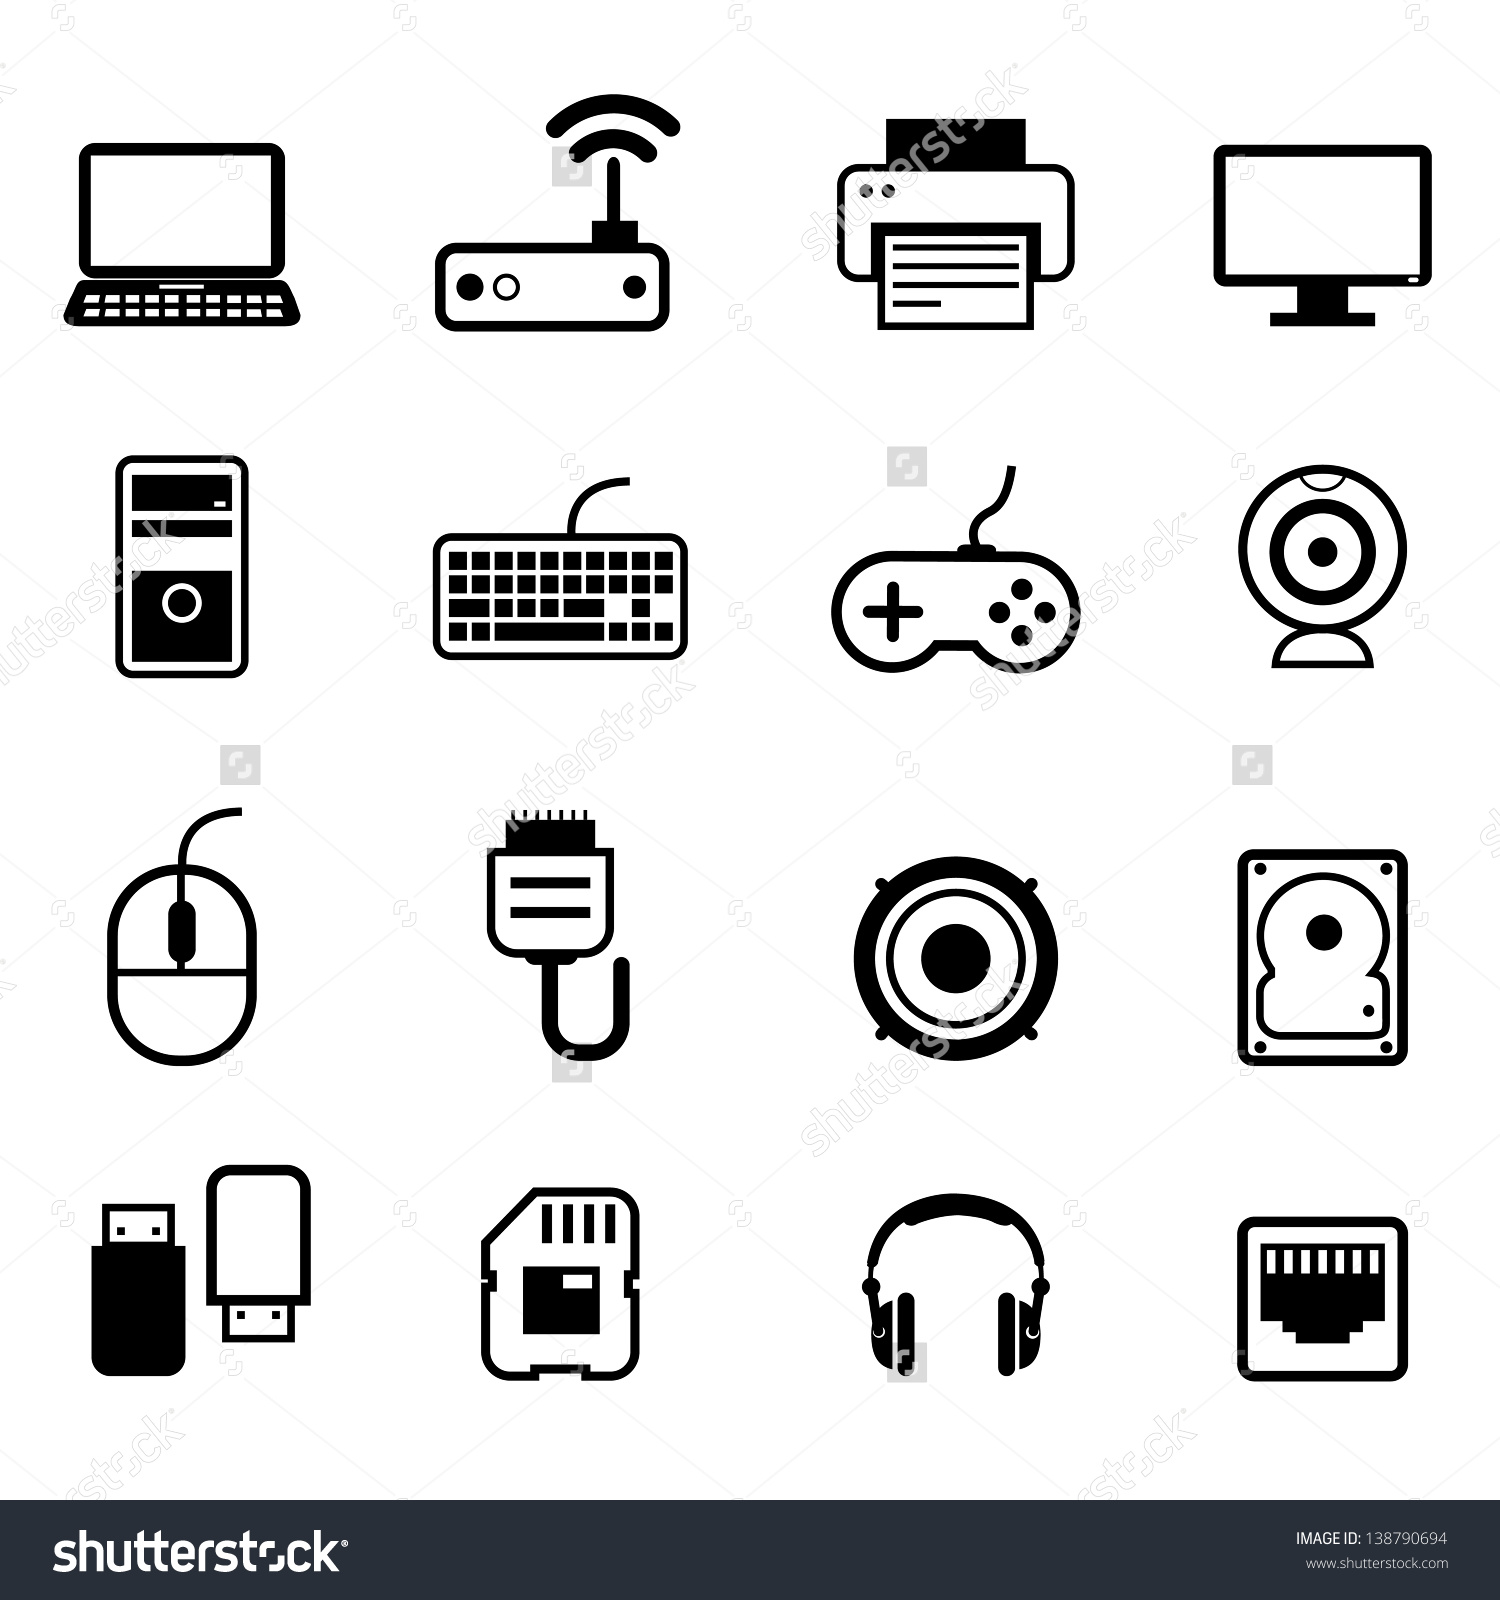 Computer Icon Free Vector Art - (31543 Free Downloads)